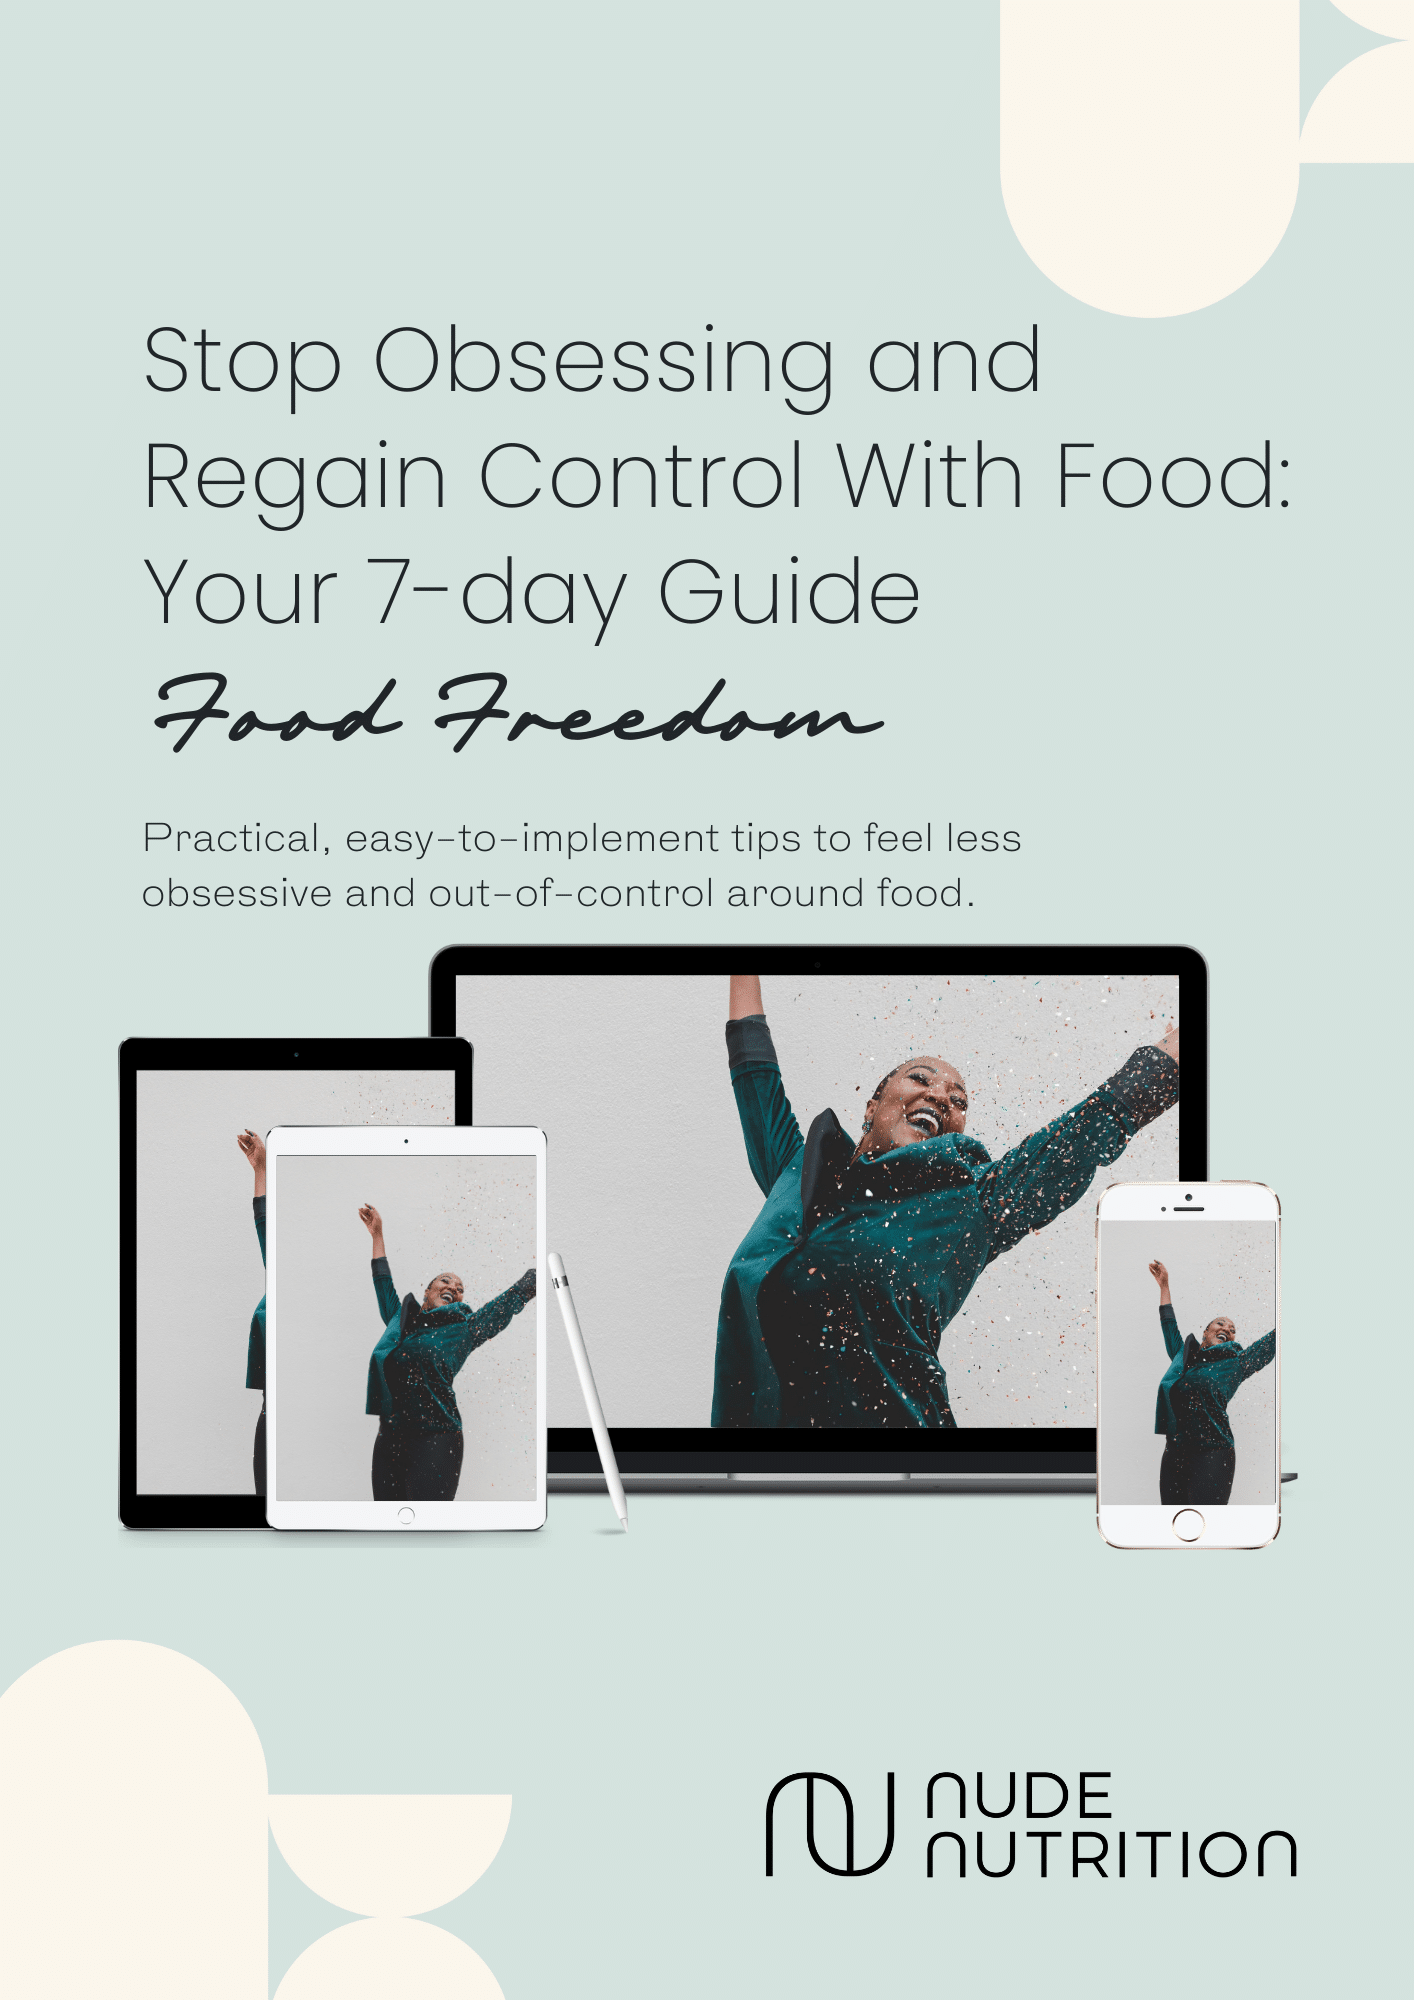 Stop Obsessing and regain control with food